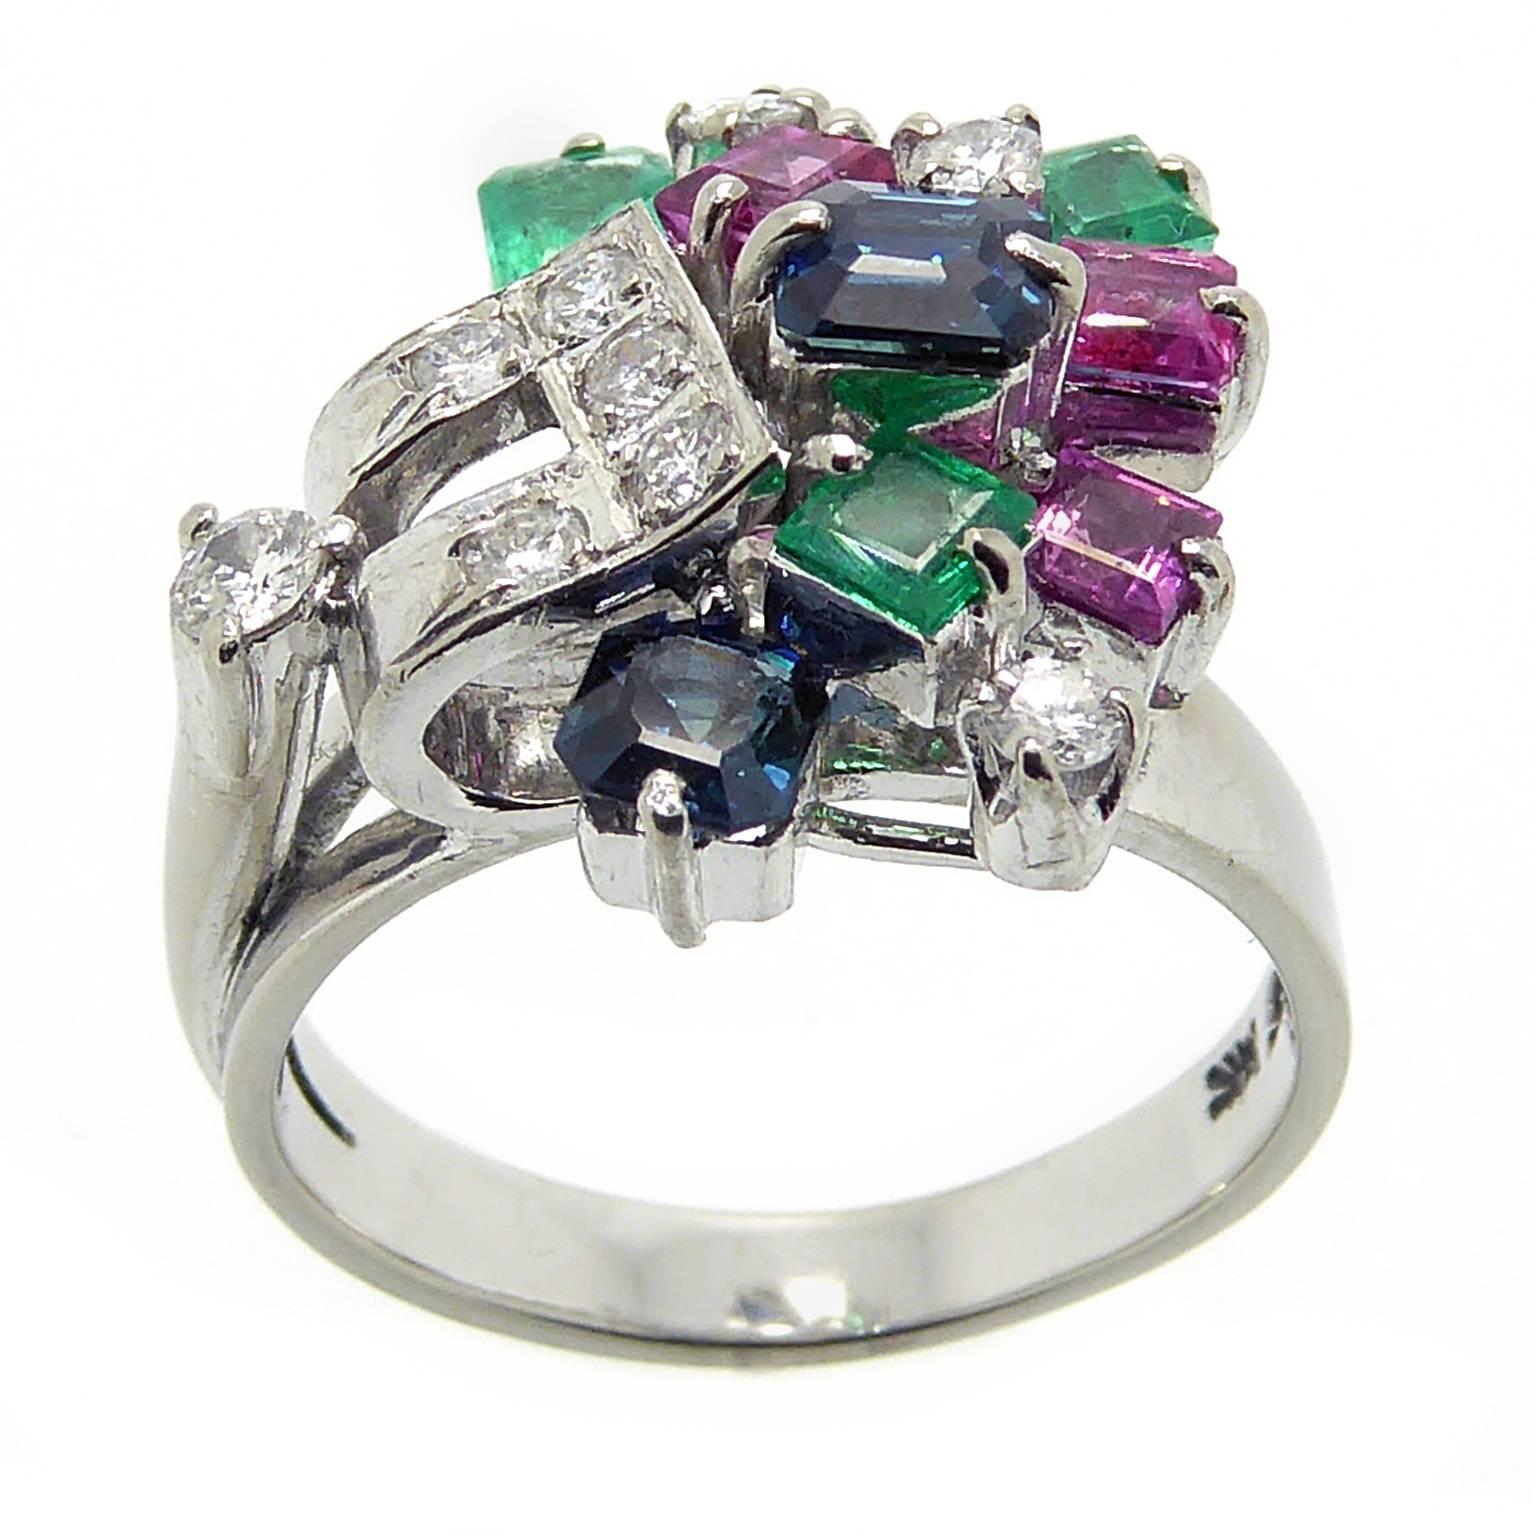 A fabulous confection of emerald cut dark blue sapphires, square trap cut rubies and brilliant cut diamonds in an asymmetrical cluster to a wide, 14k white gold band.  A stunning and unusual cocktail or right hand ring with must-have retro